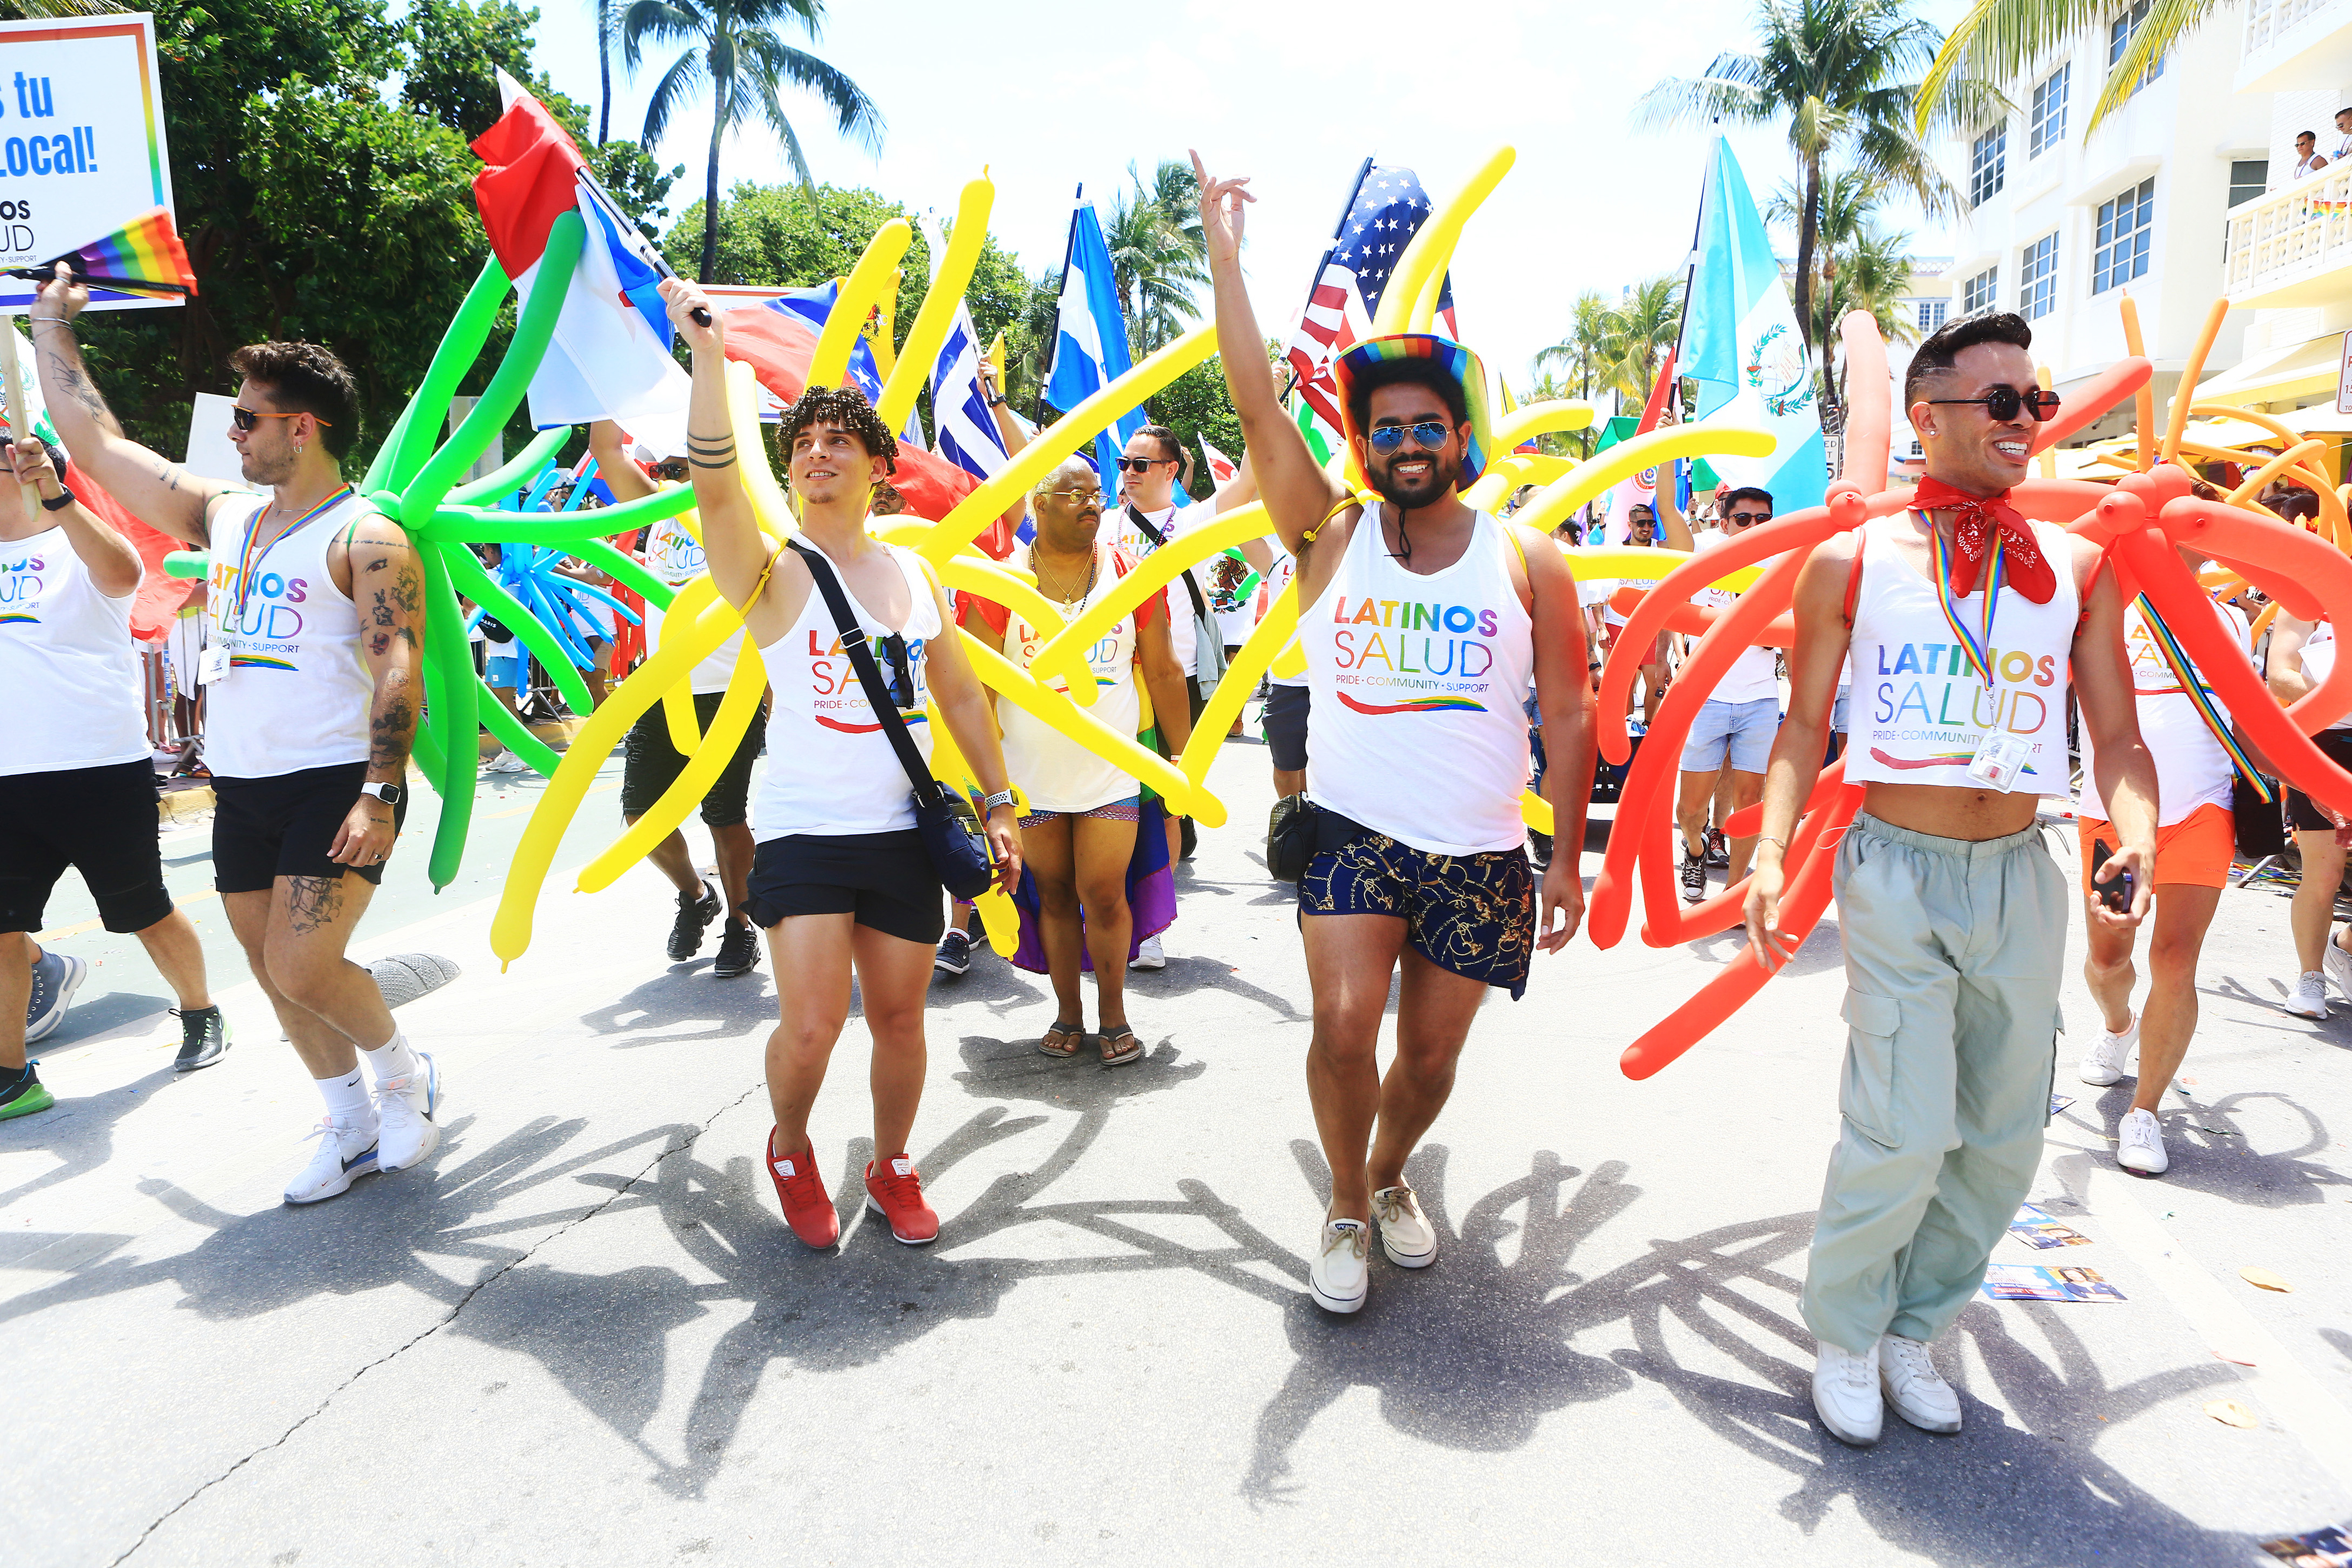 Group of people marching with &quot;Latinos Salud&quot; shirts and carrying colorful ribbons during a pride parade